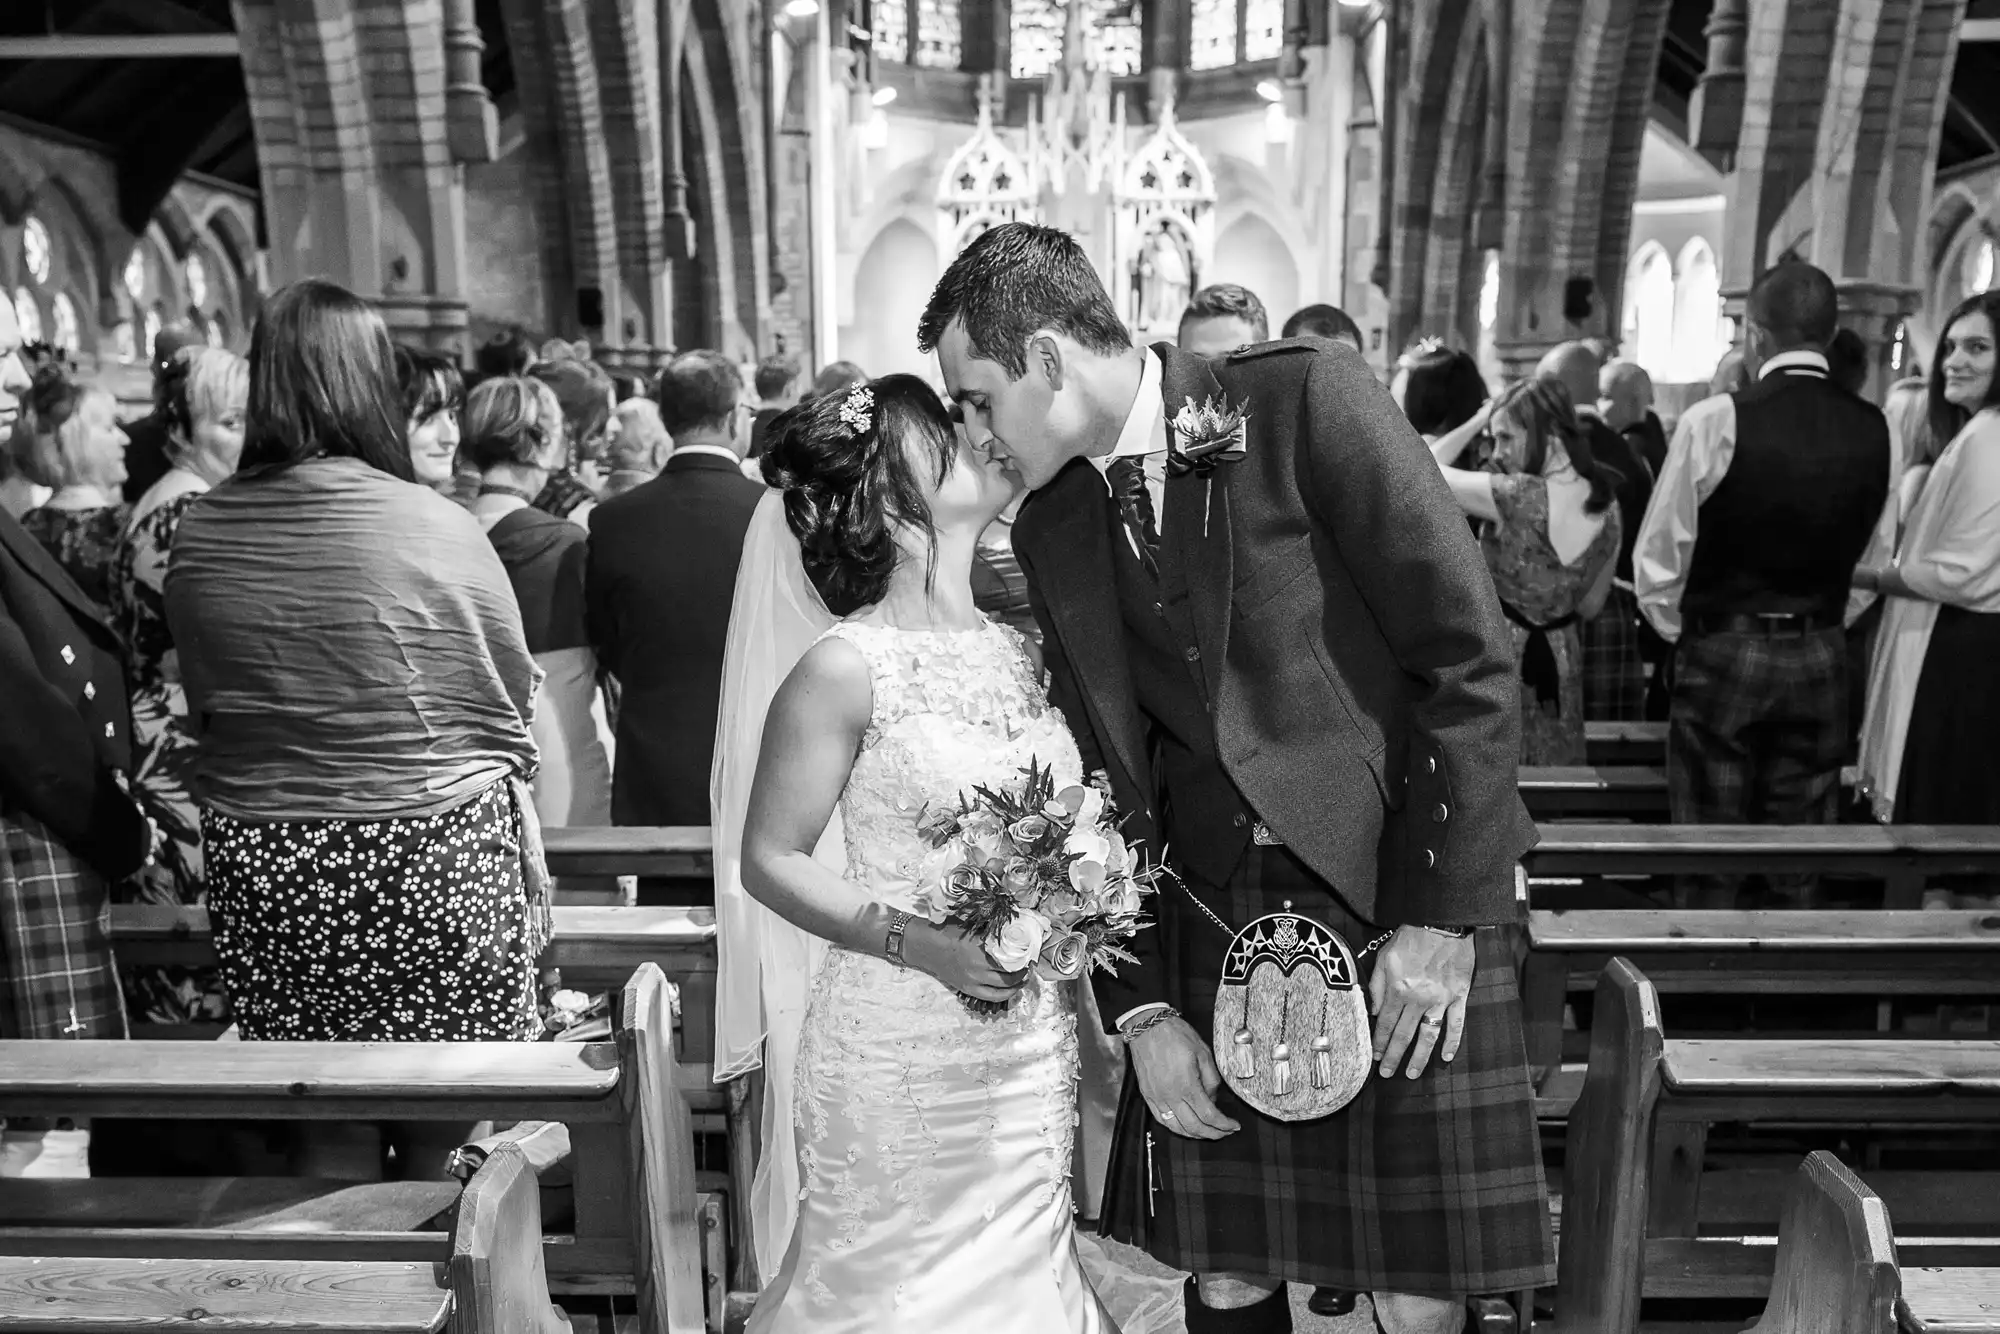 A bride and groom kissing in a church, surrounded by guests during their wedding ceremony, with the groom wearing a kilt.